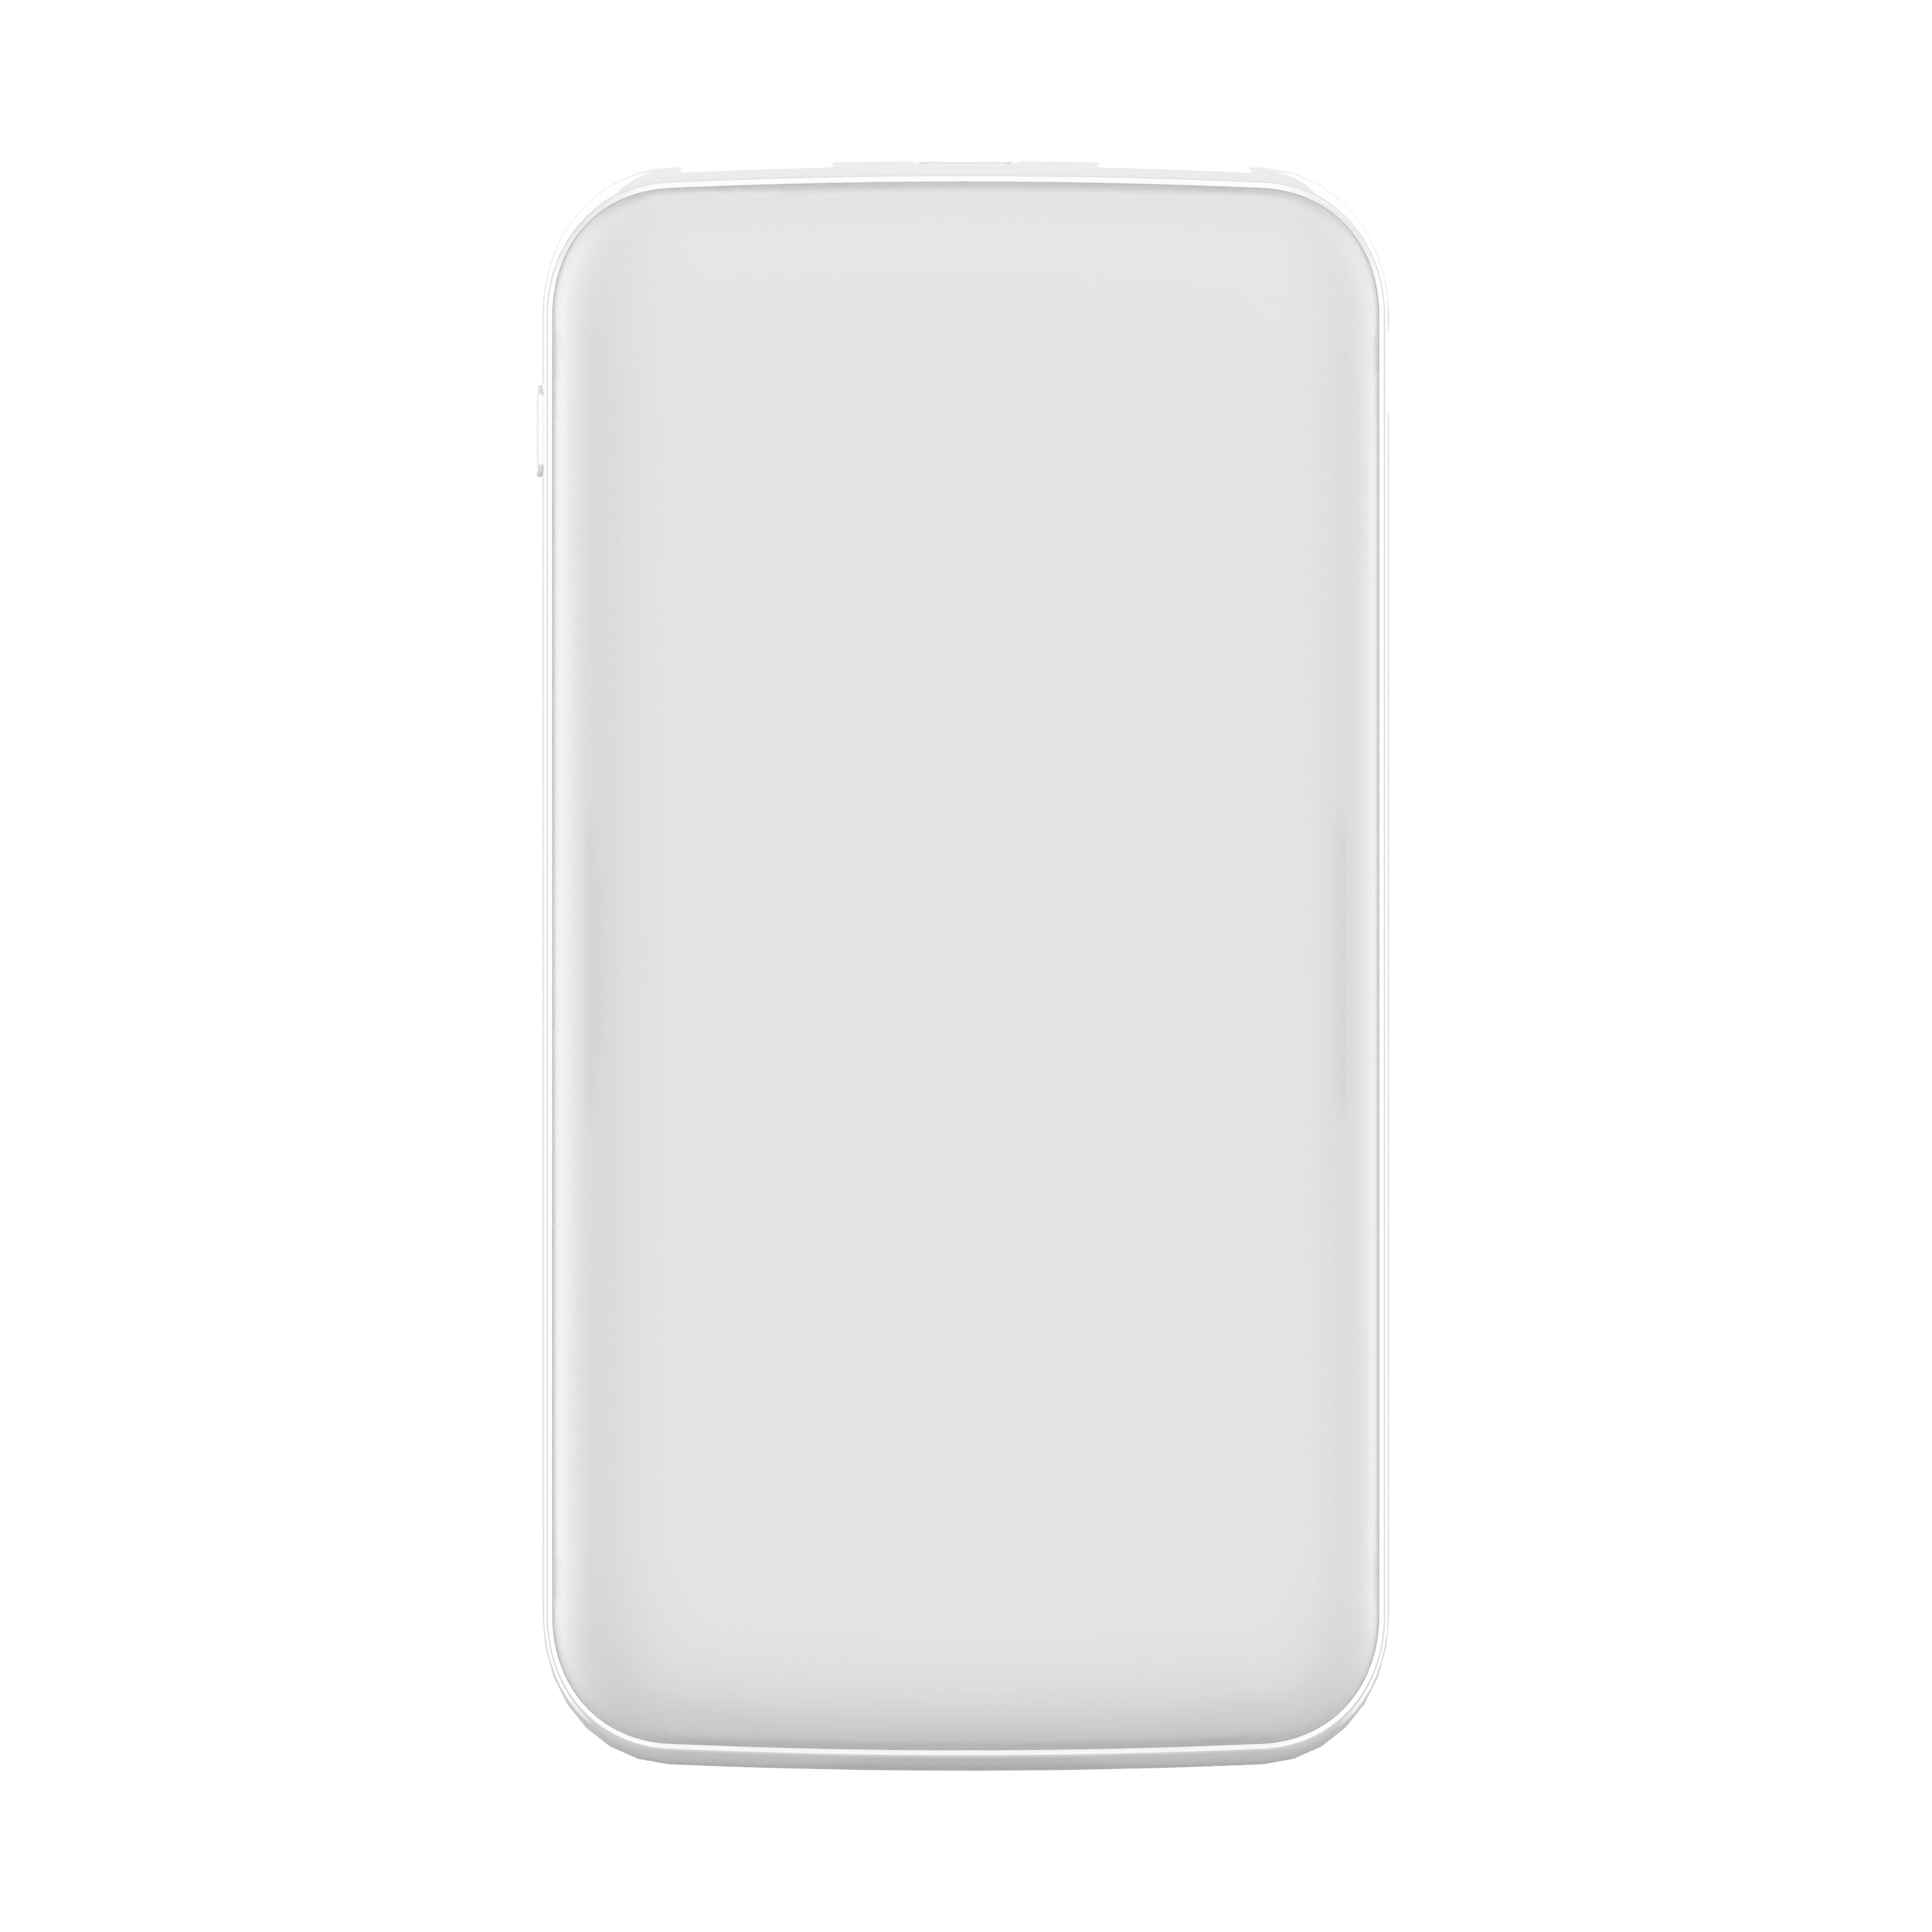 REF Power Fast Charge "C-Port" Portable Power Bank White front